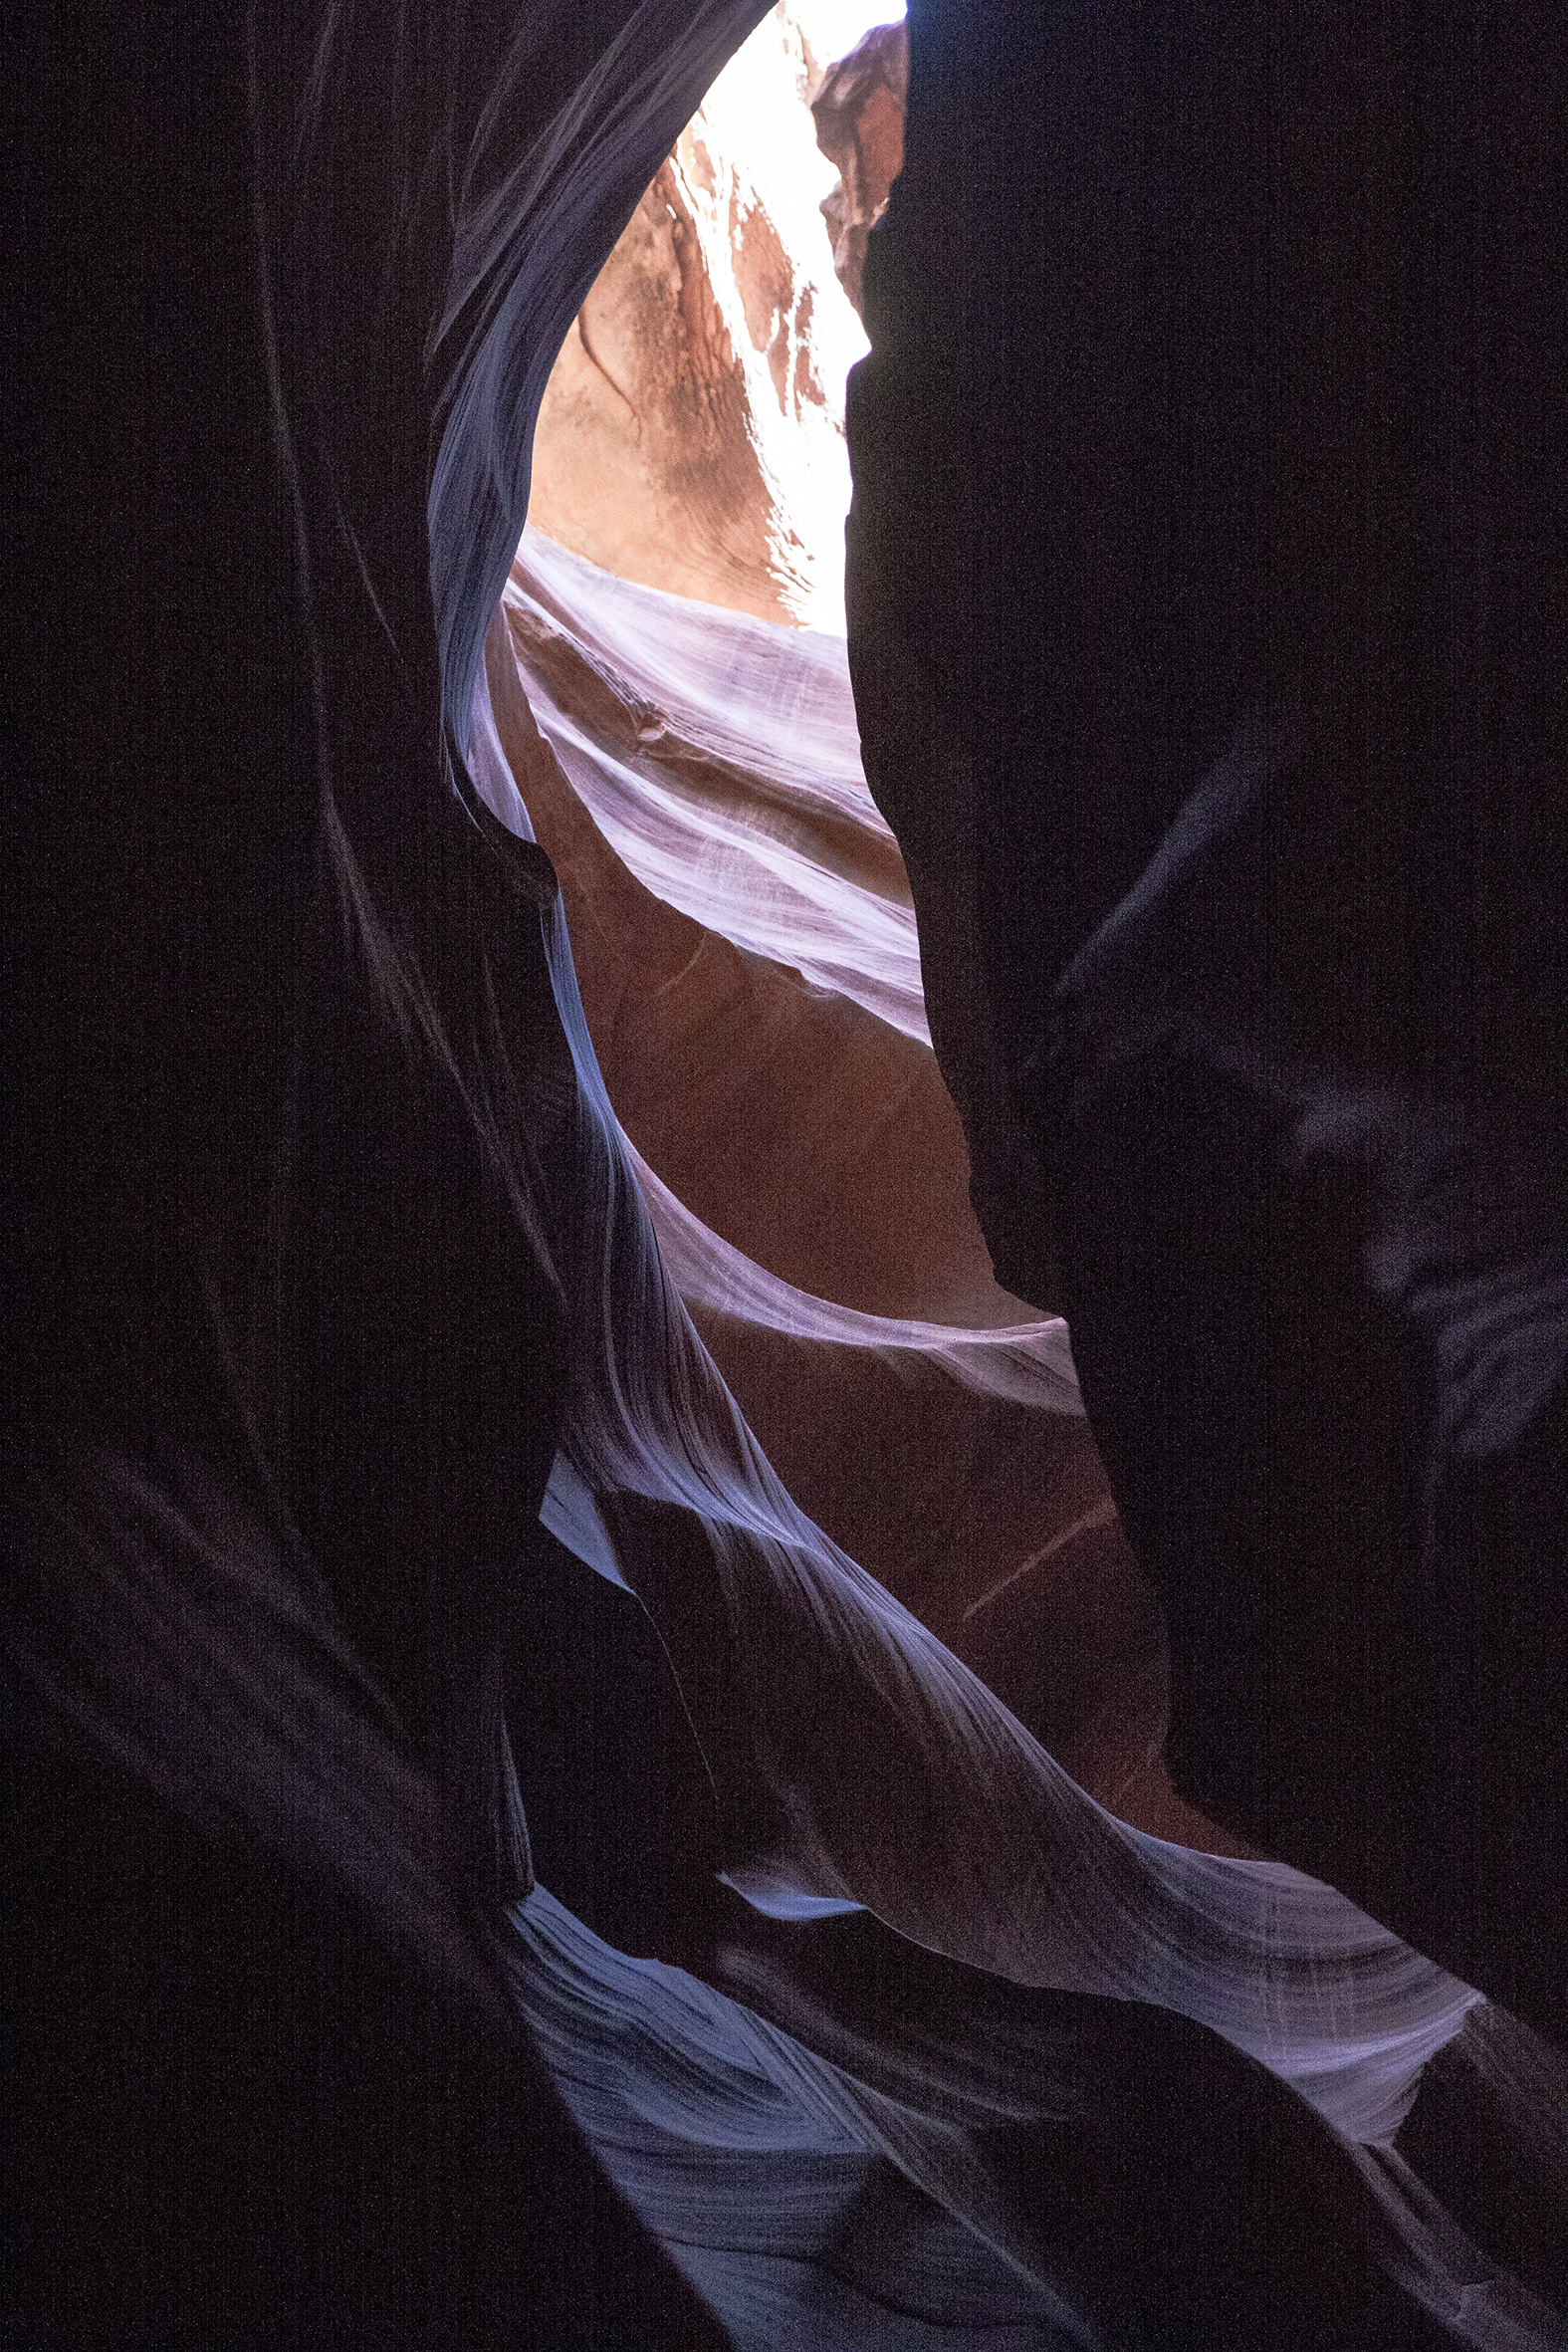 naturaliste-antelope-canyon-reserve-navajo-usa-ouest-2012-marie-colette-becker-07